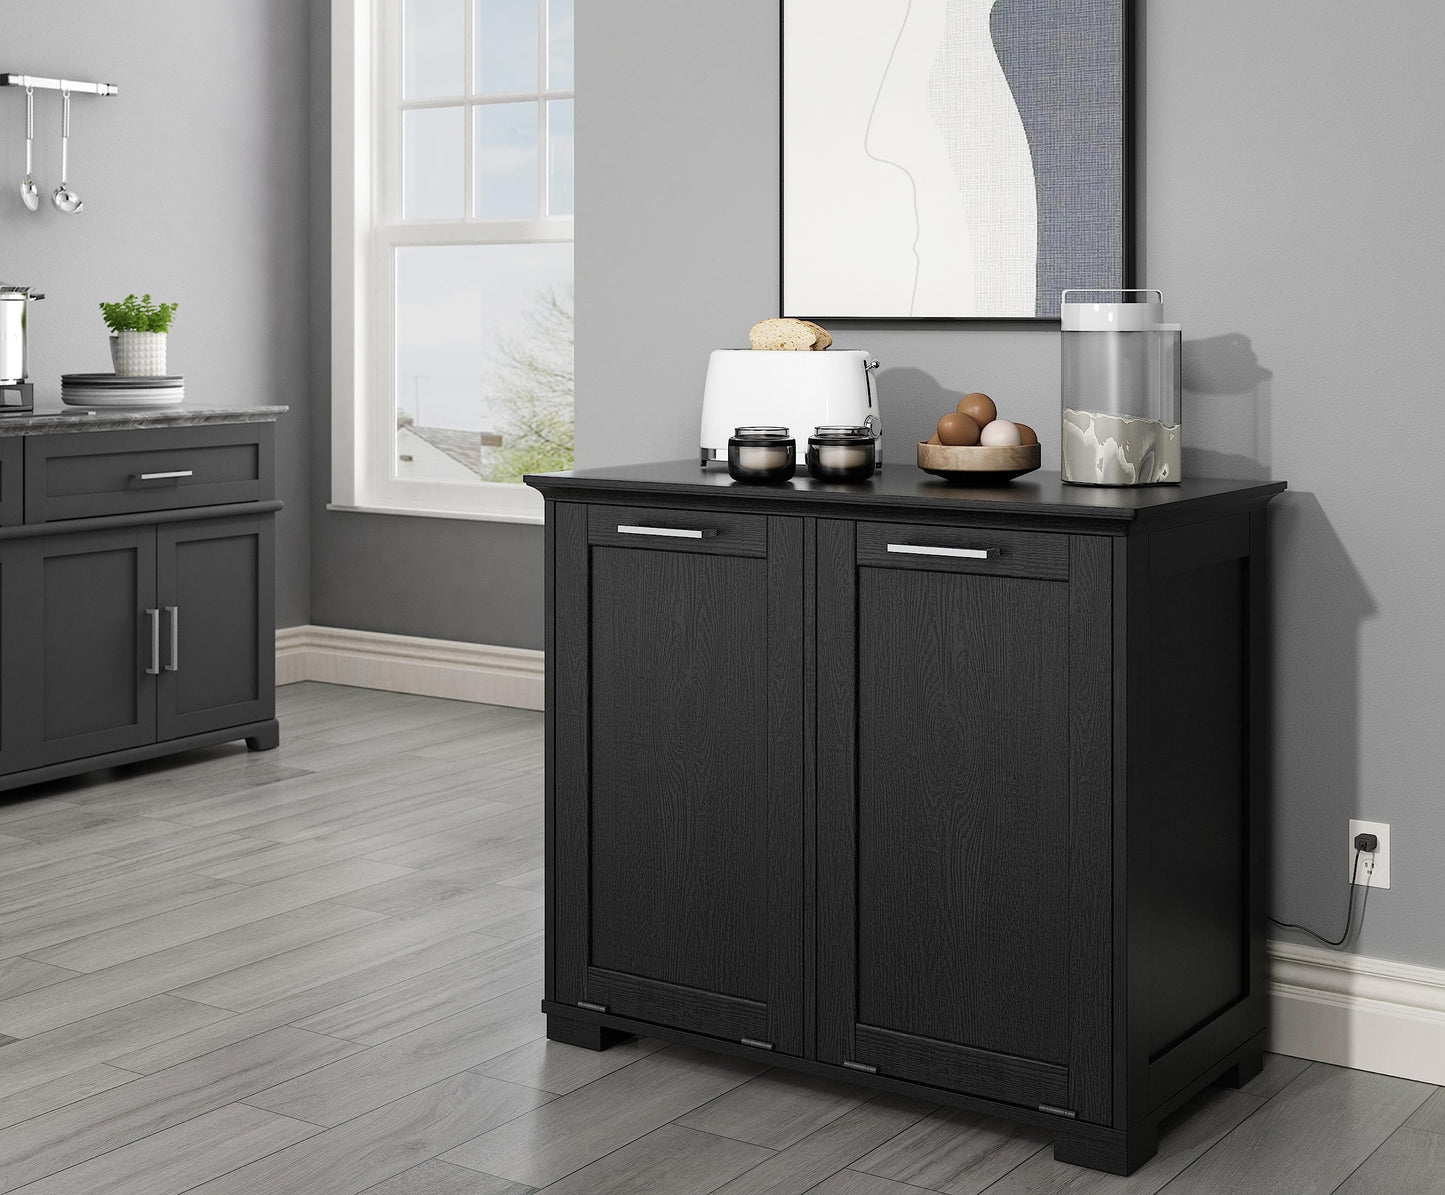 OLD CAPTAIN Double Tilt Out Trash Cabinet, Wooden Kitchen Garbage Can Free Standing Holder, Black Finish